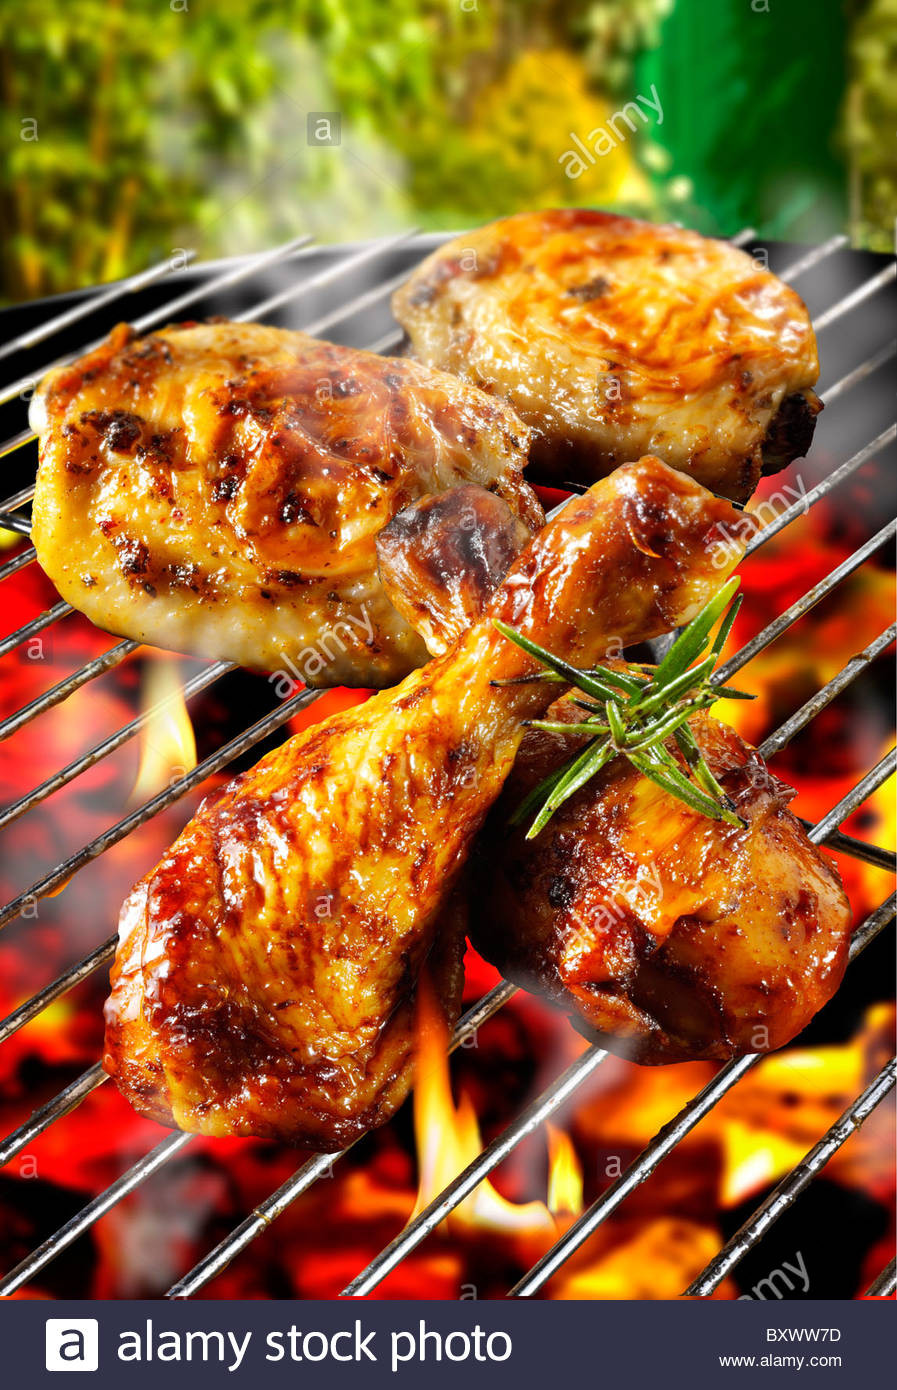 Bbq Chicken Legs On Grill
 Barbecue chicken legs & thighs on a BBQ grill Stock